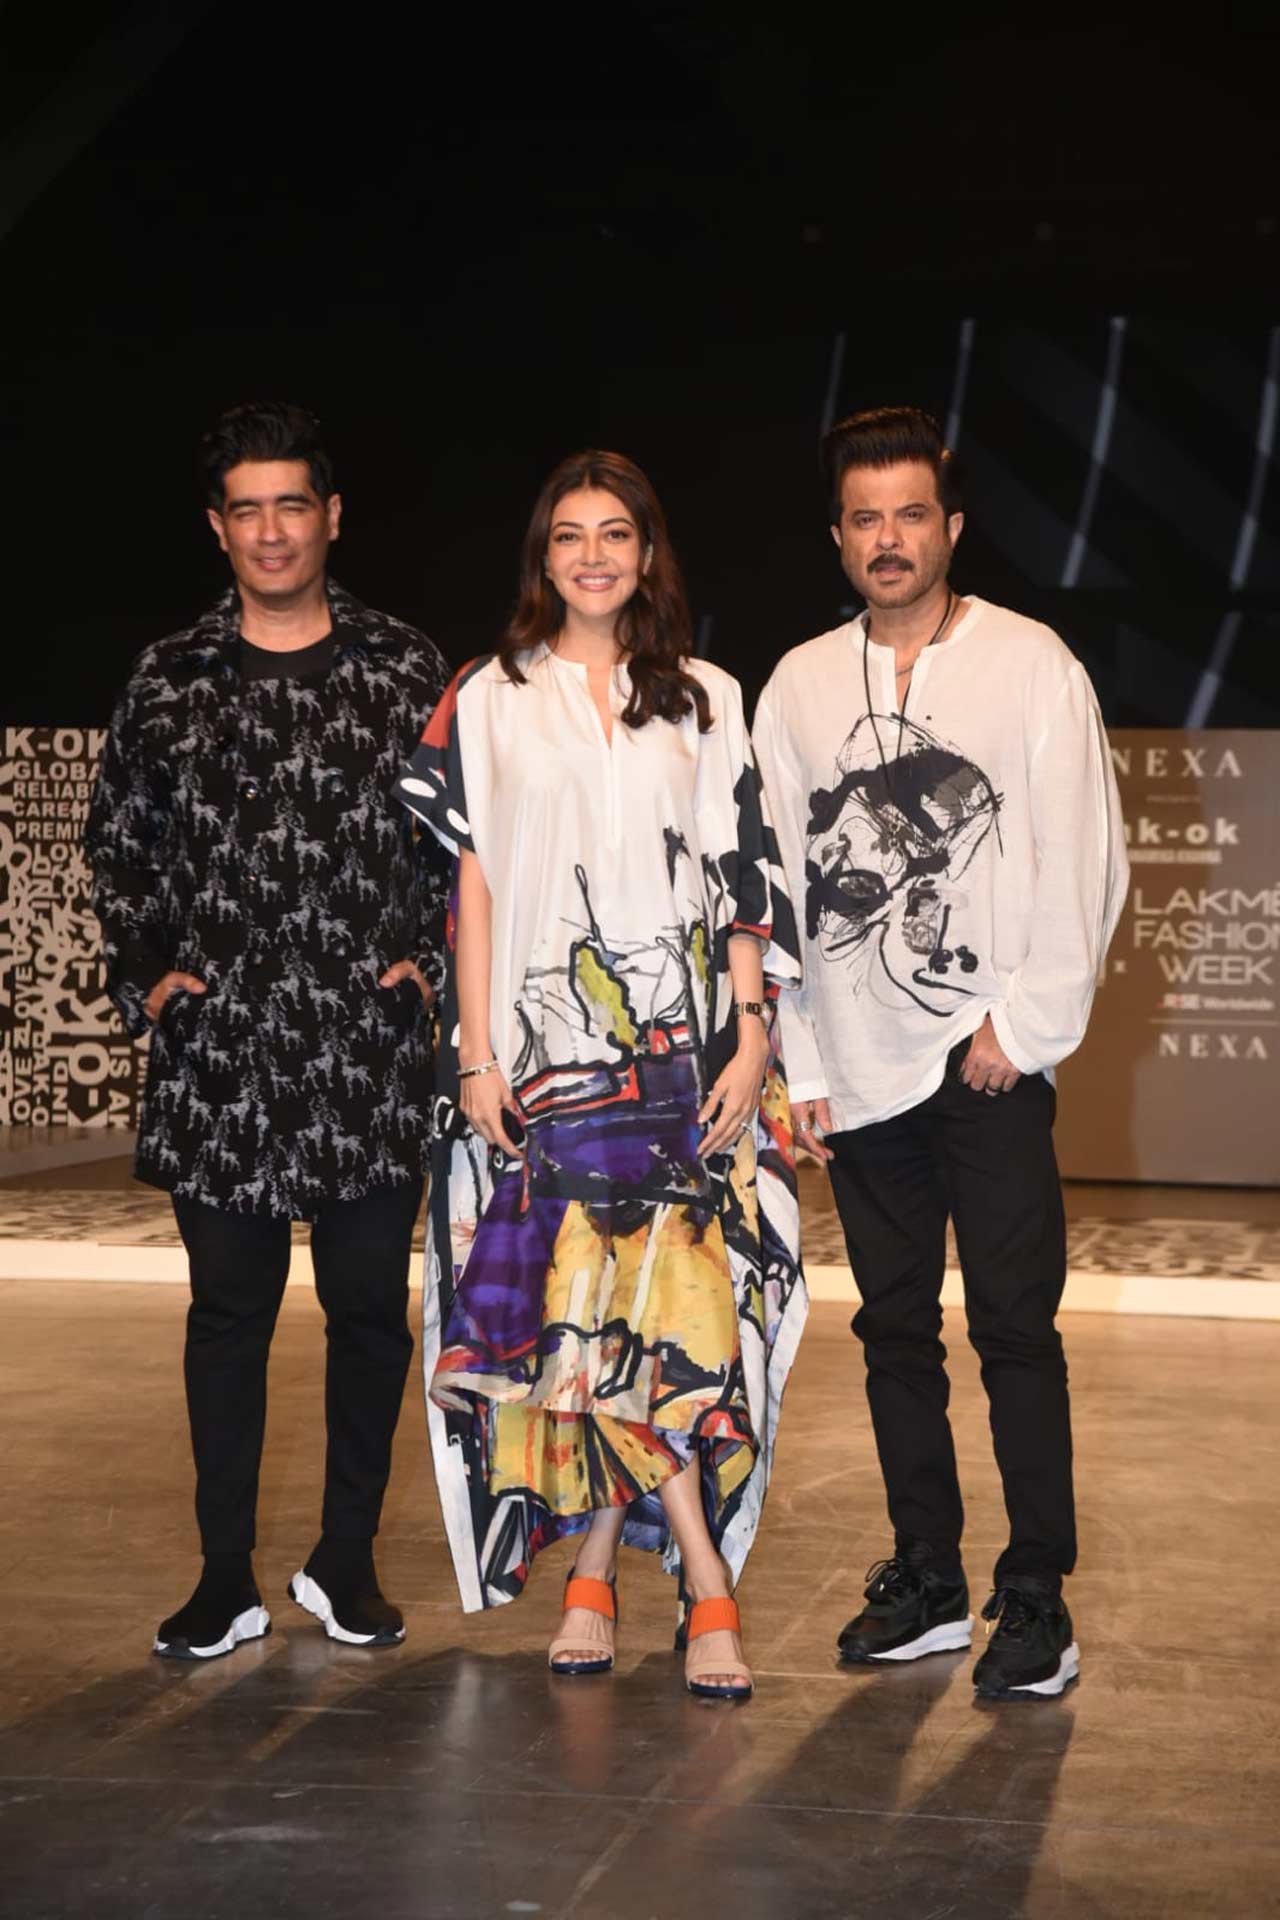 Kajal Aggarwal posed for the shutterbugs along with popular designer Manish Malhotra and Bollywood actor Anil Kapoor. The Singham actress walked the ramp with her husband Gautam Kitchlu at LFW Day 4.